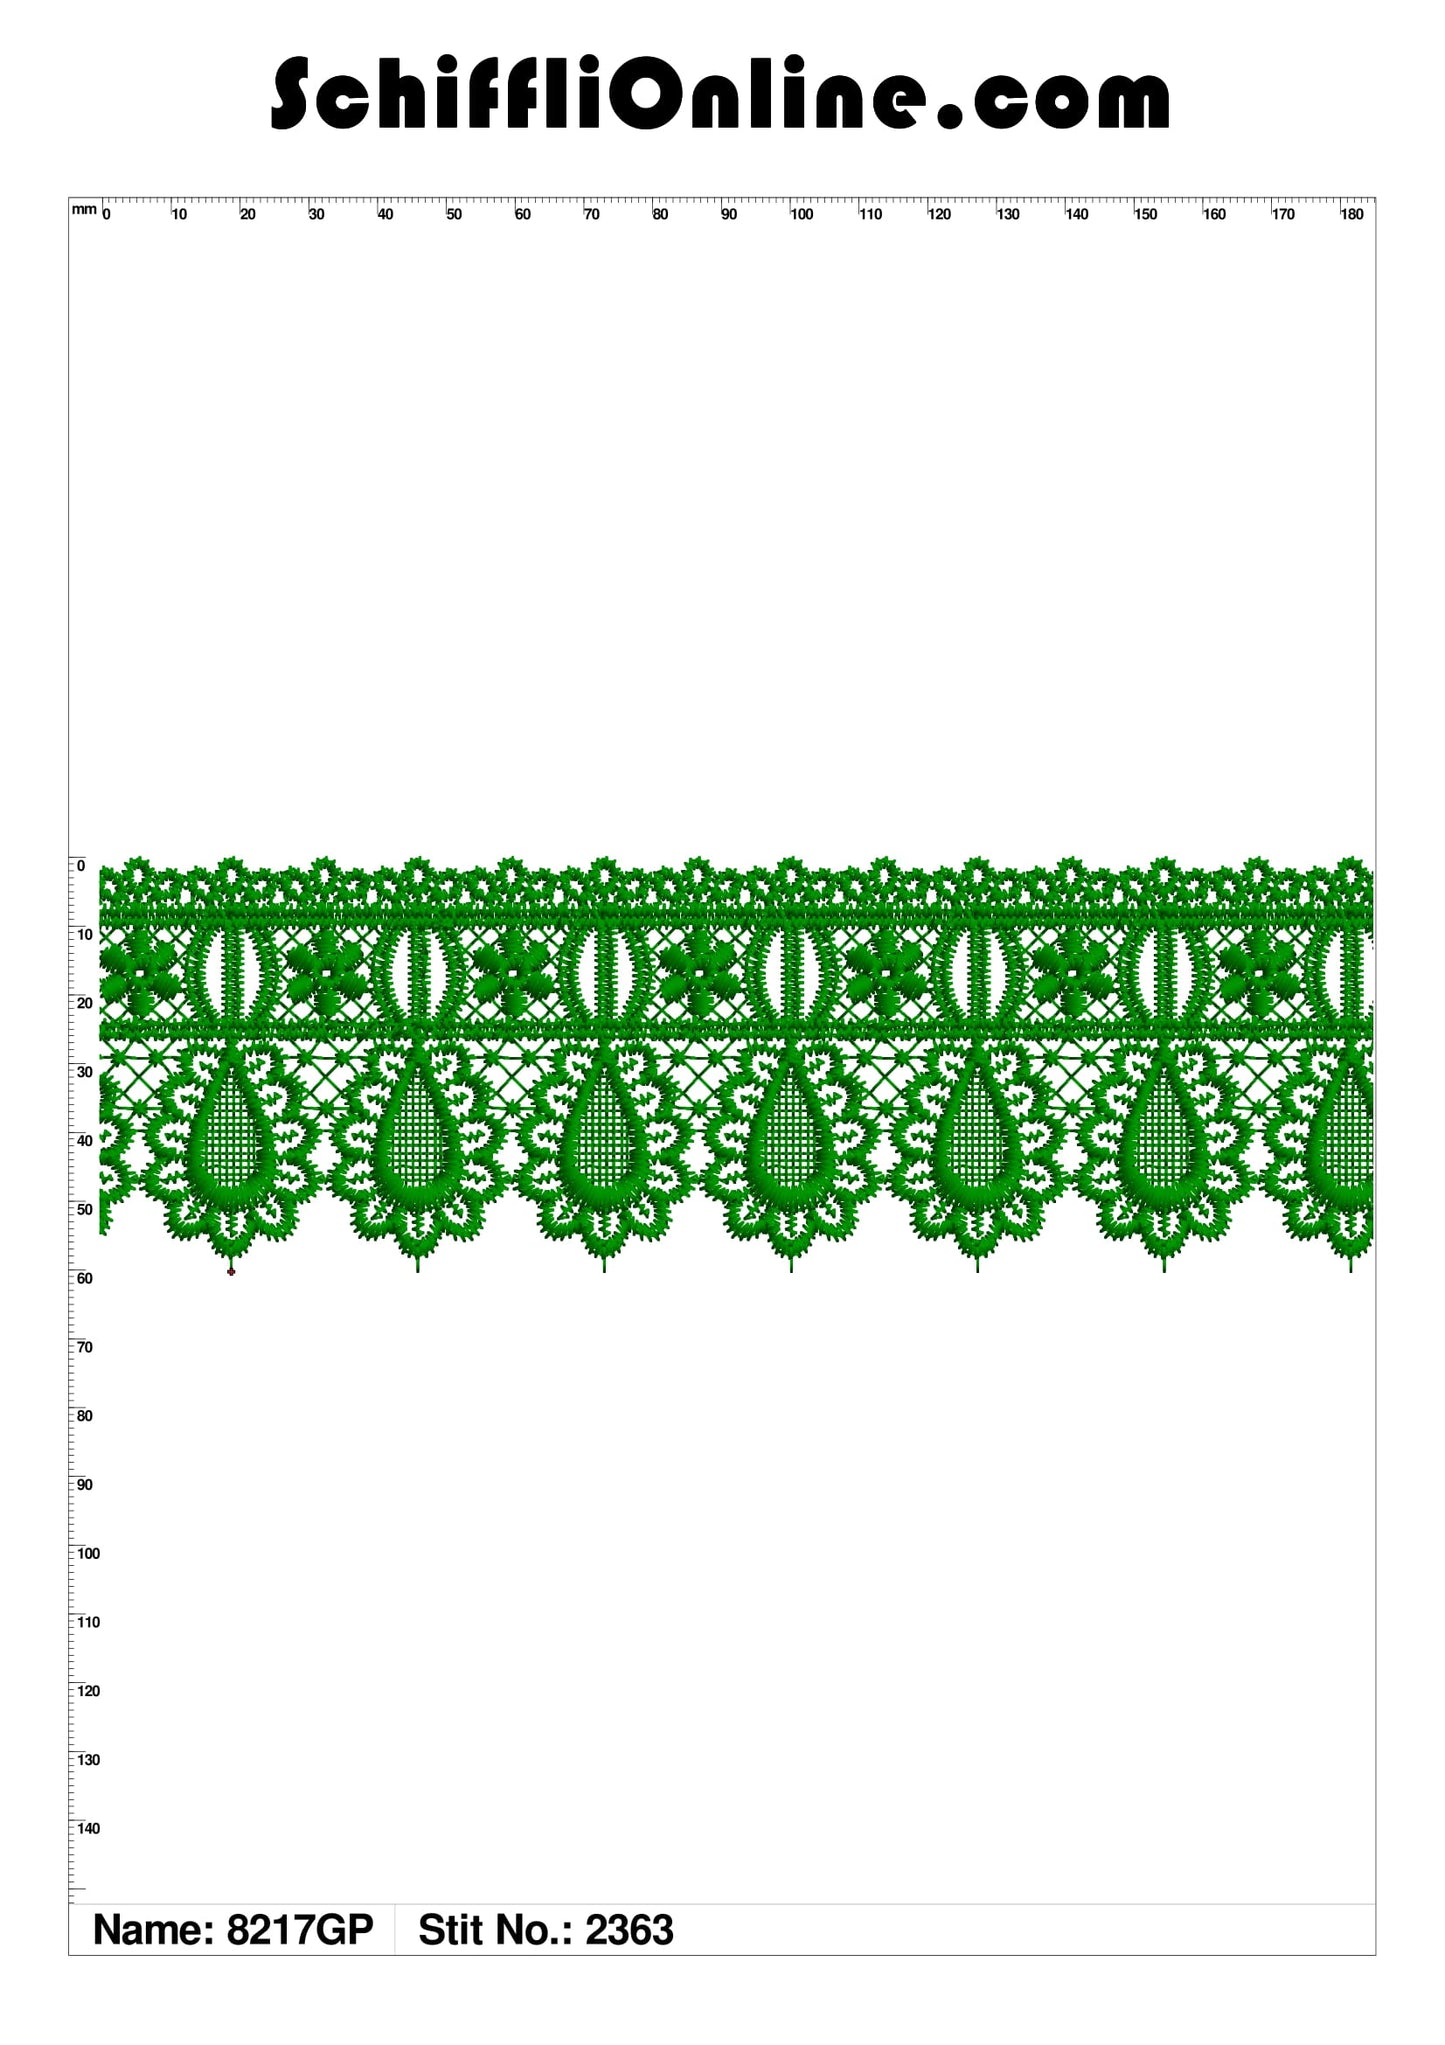 Book 165 CHEMICAL LACE 4X4 50 DESIGNS